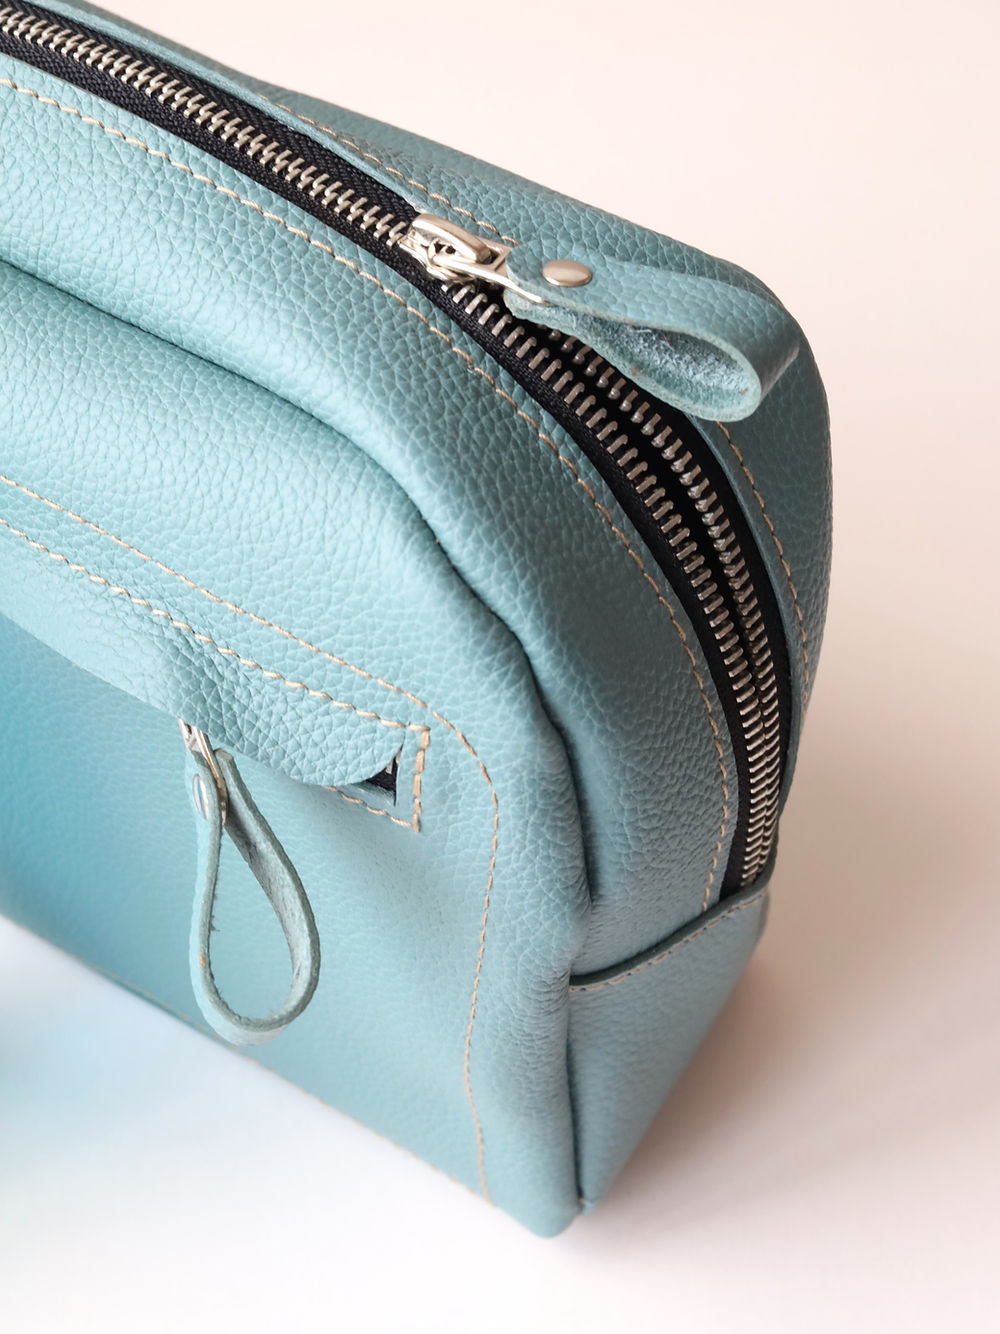 A DOUGLAS Toiletry Bag - Turquoise with a zipper on it.